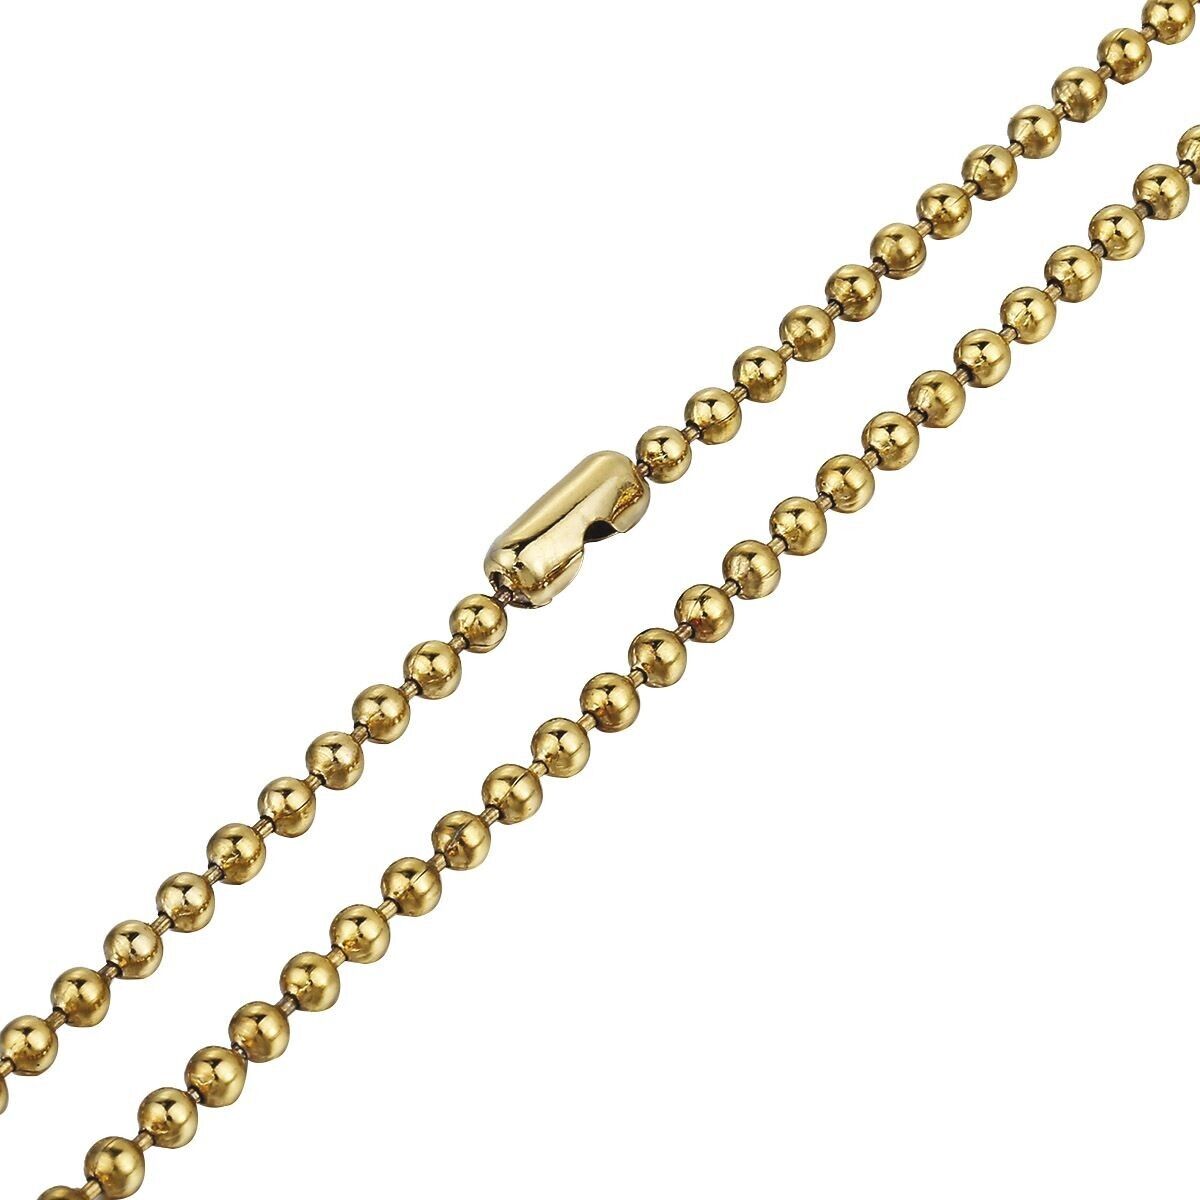 1 Pcs Gold Plated 2mm Ball Chain Necklace 49cm(19 1/4") long